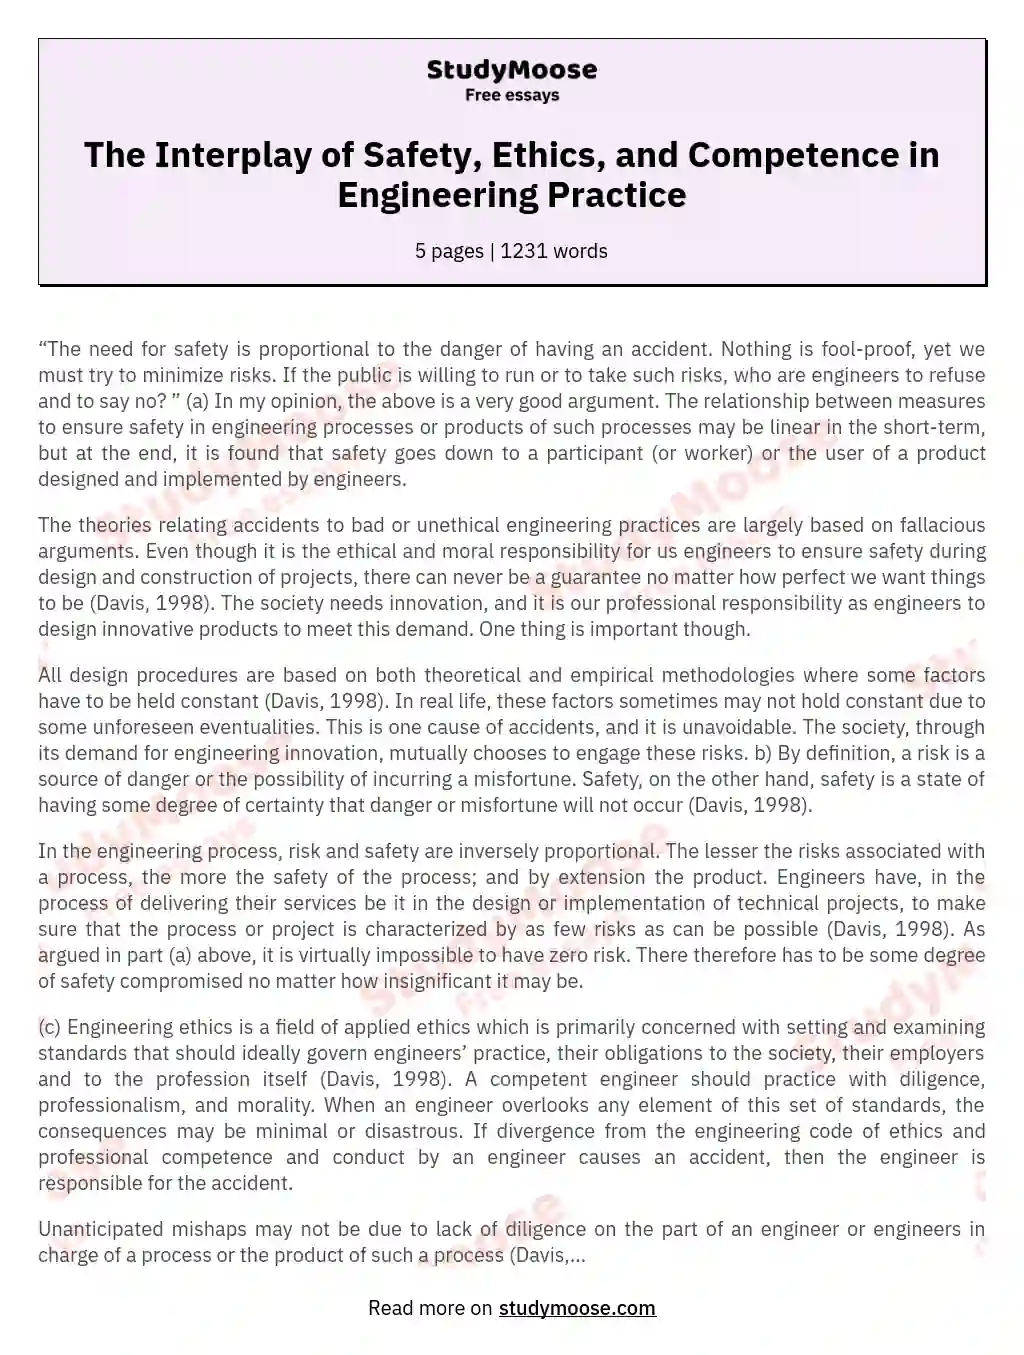 The Interplay of Safety, Ethics, and Competence in Engineering Practice essay